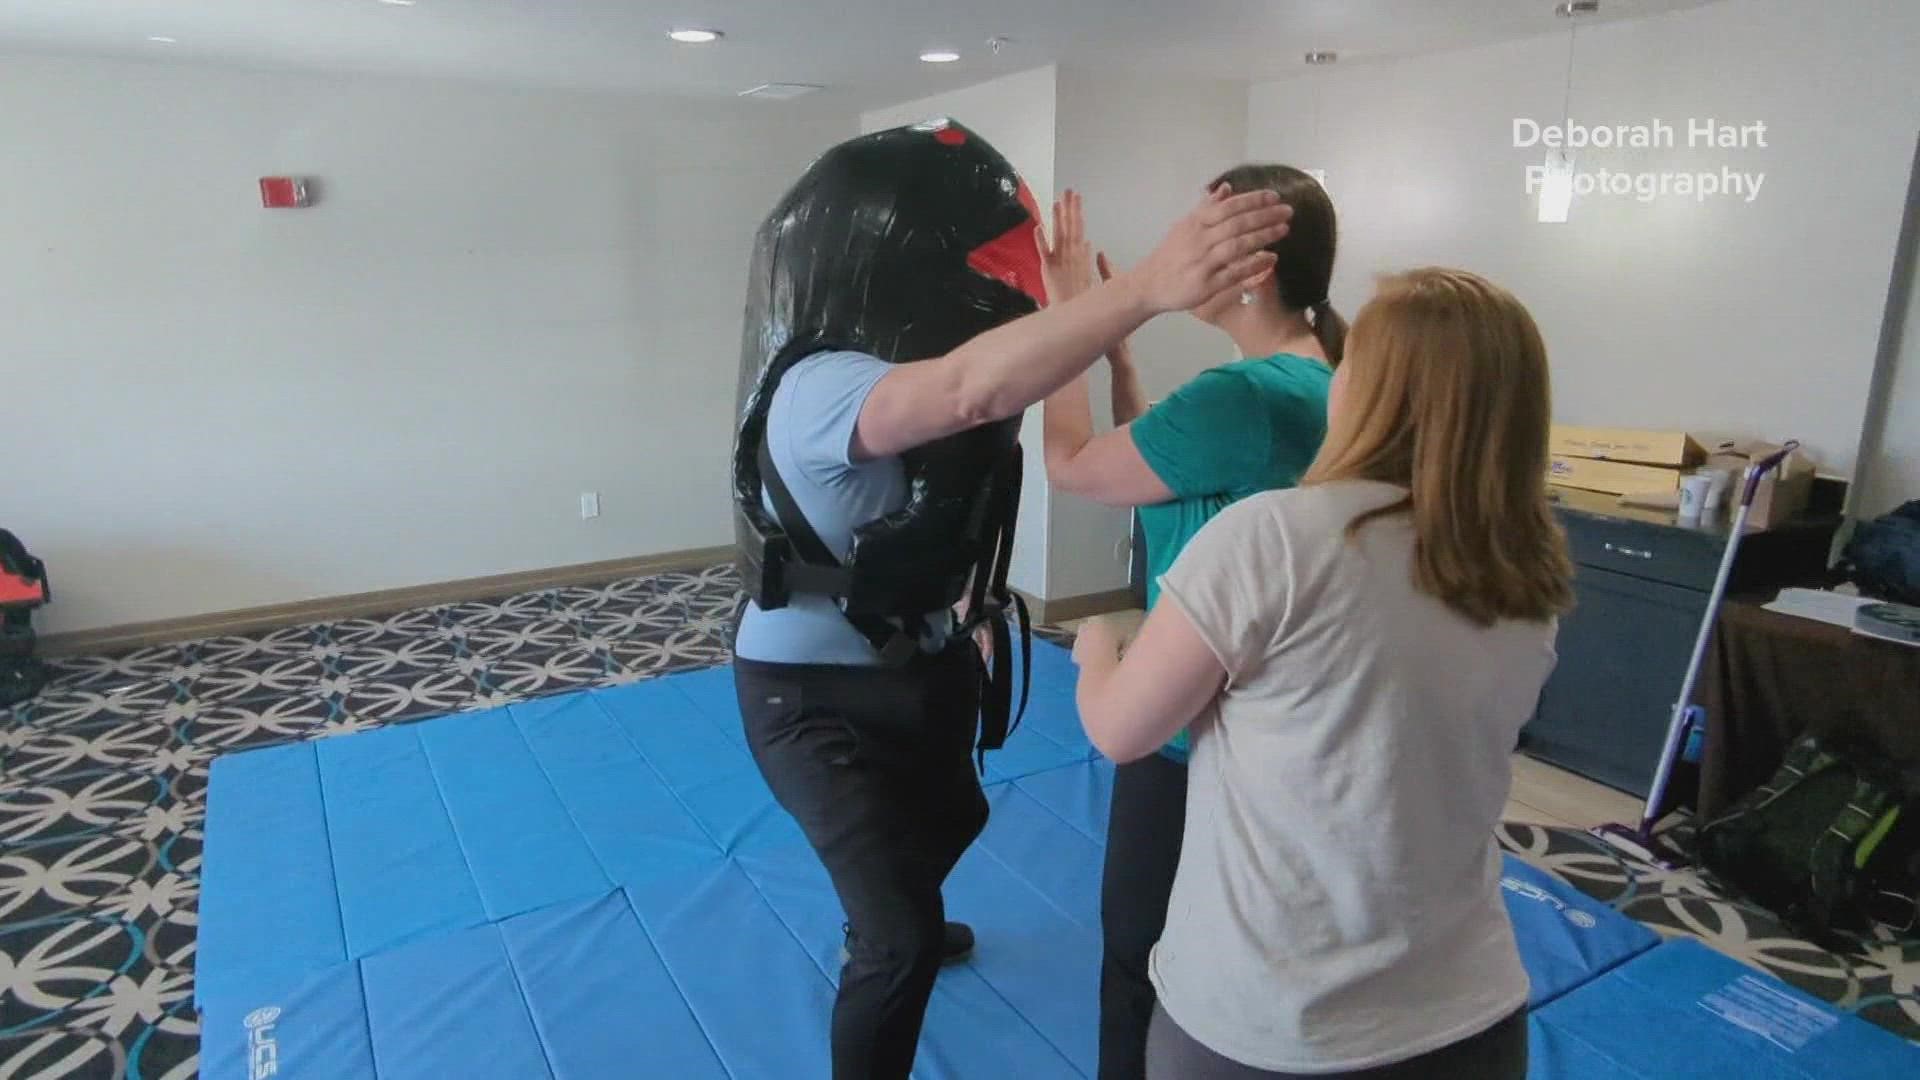 Impact Personal Safety of Colorado holds self-defense classes a few times a month.